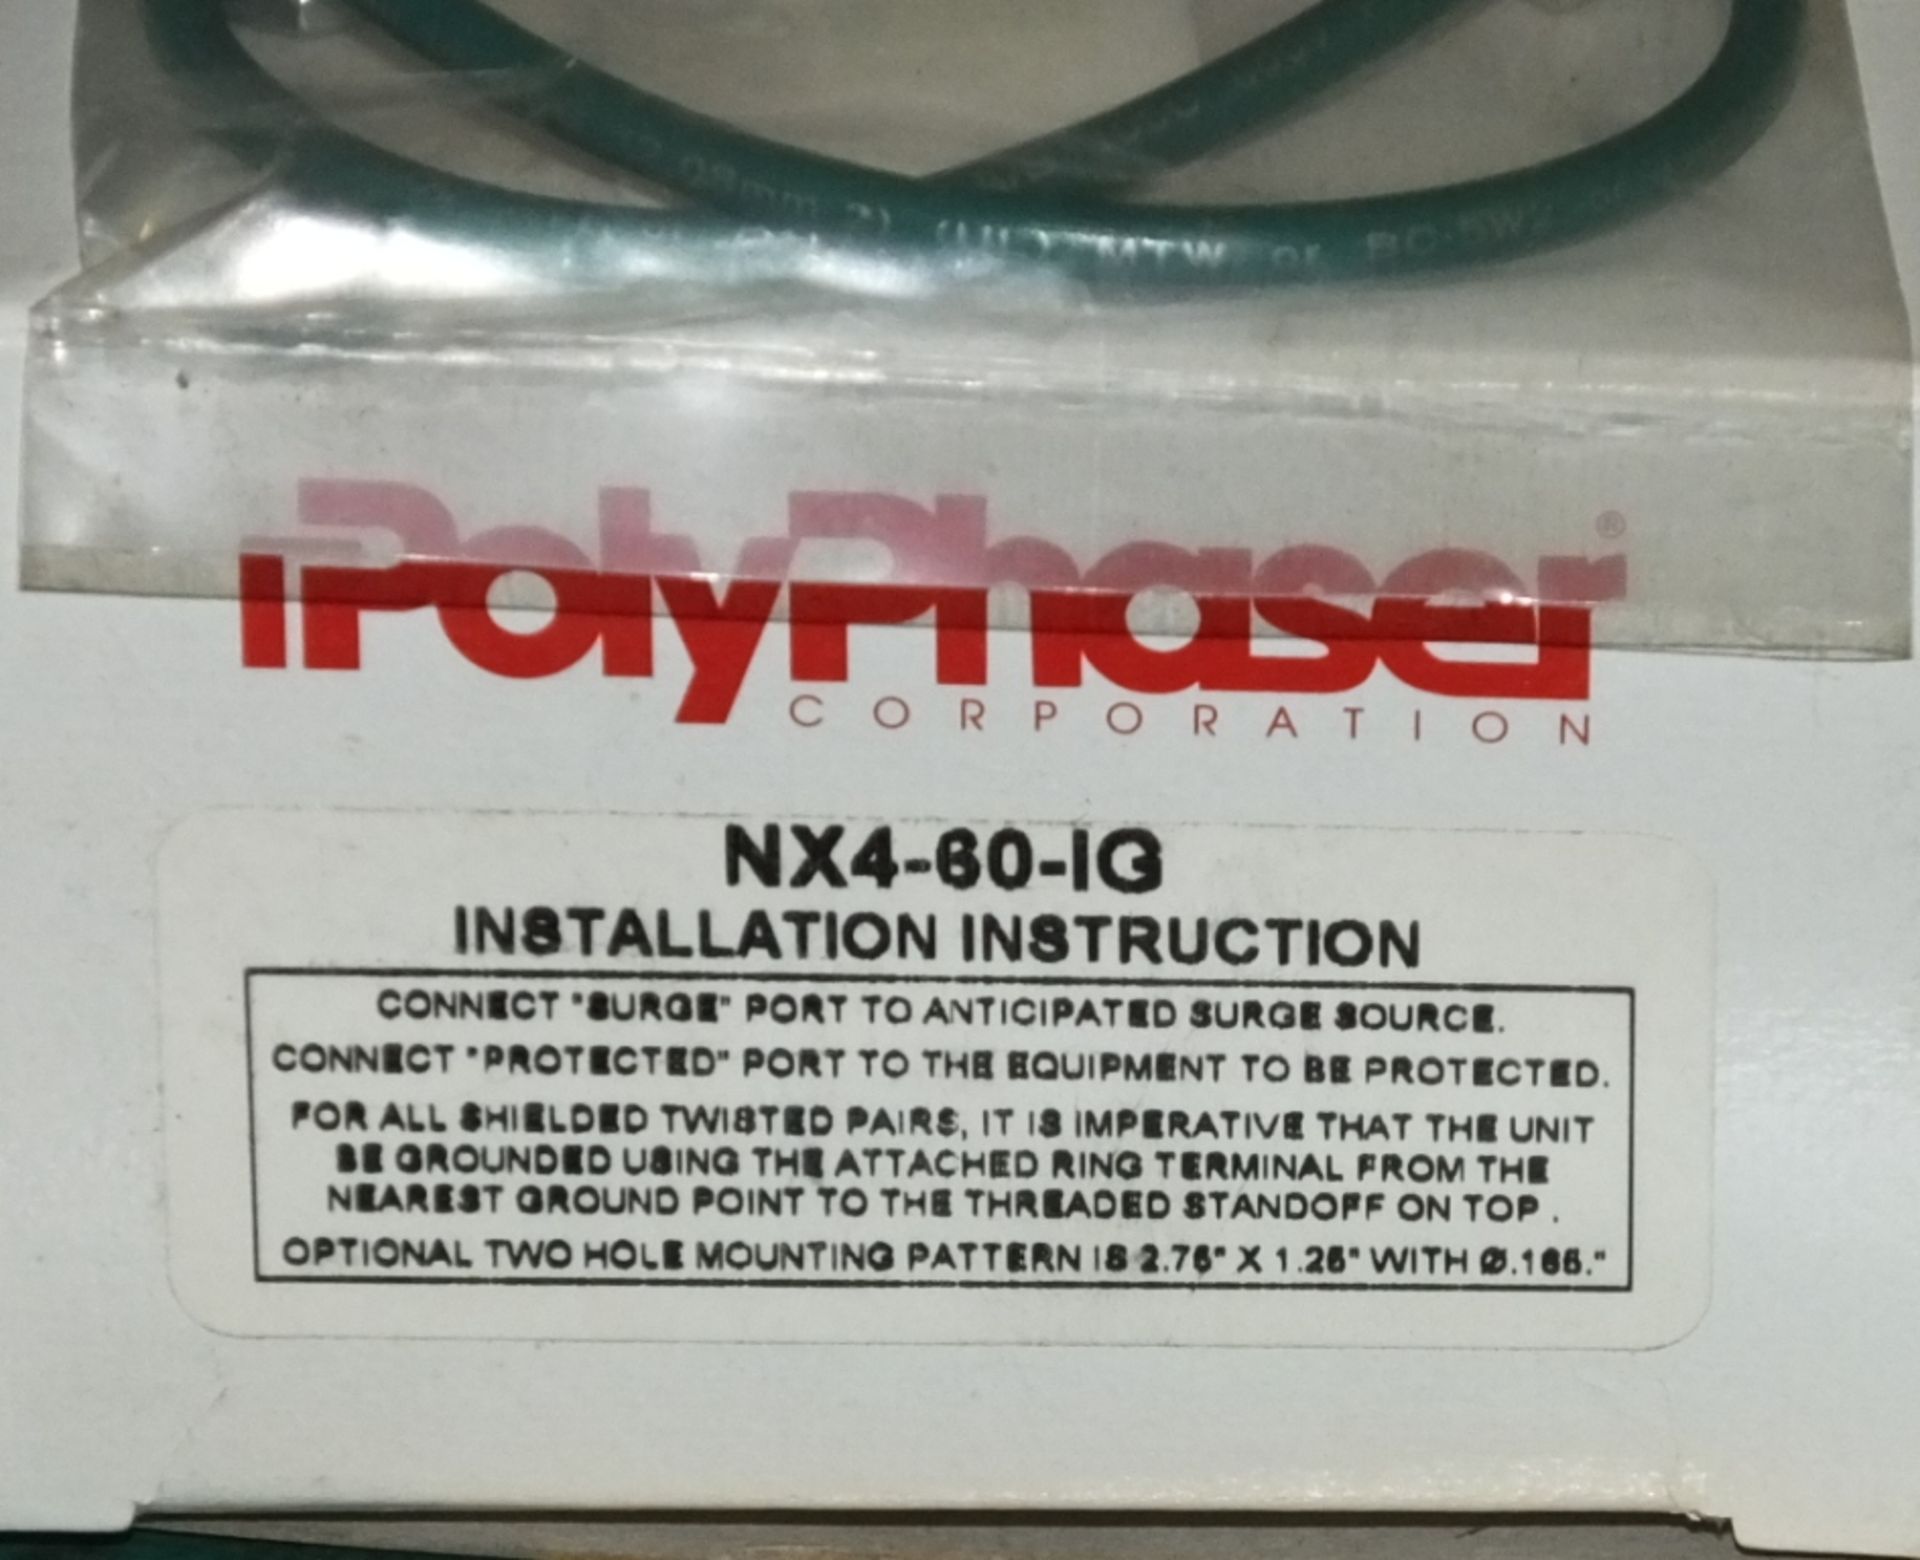 30x Polyphaser NX4-60-IG Data Network Protectors - Image 2 of 3